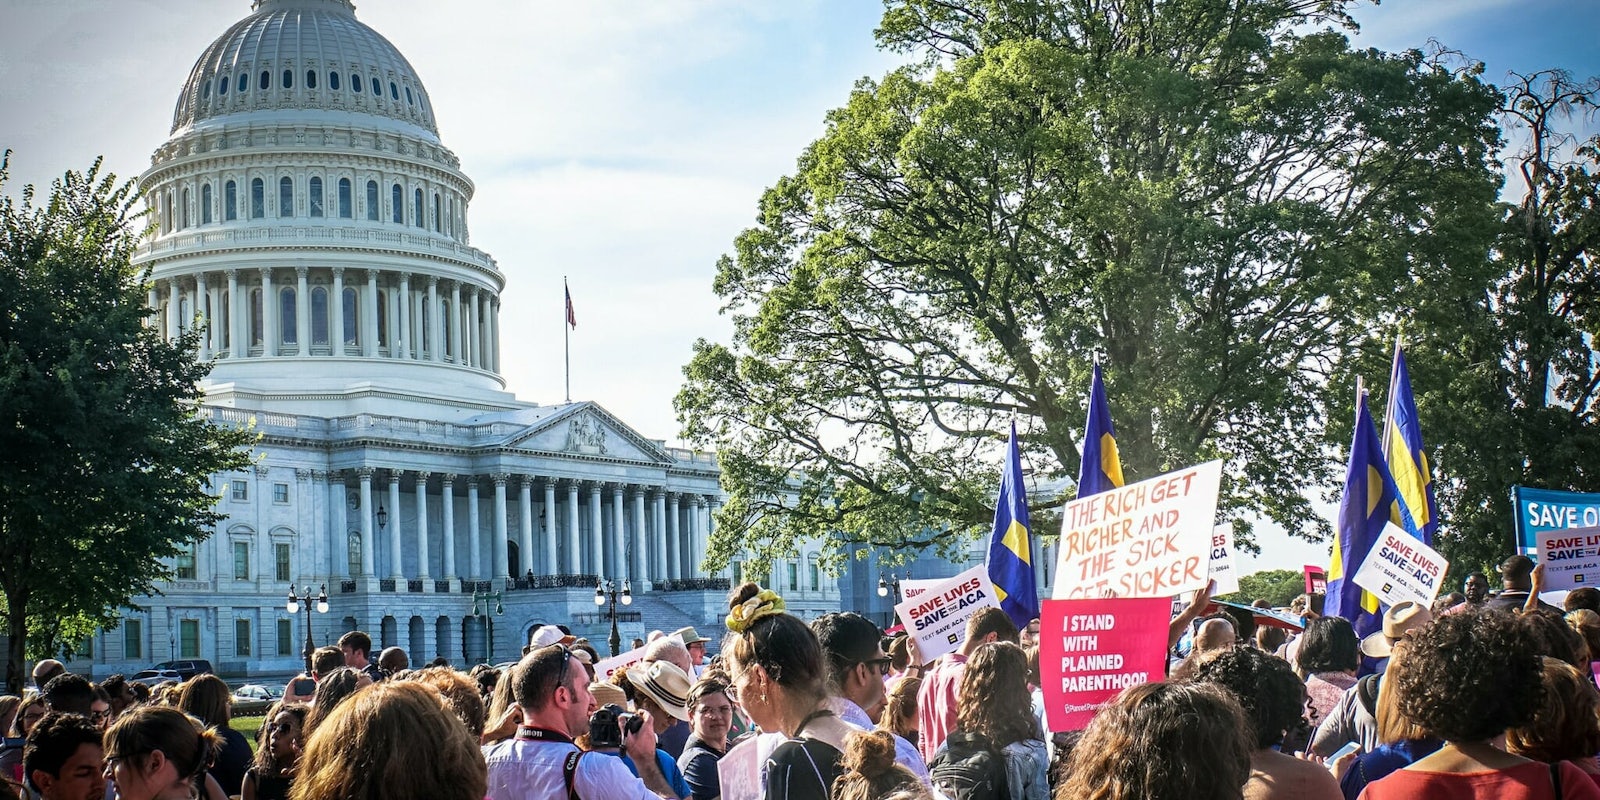 Planned Parenthood and Human Rights Campaign protesters gather at the U.S. Capitol to support quality health care for all.